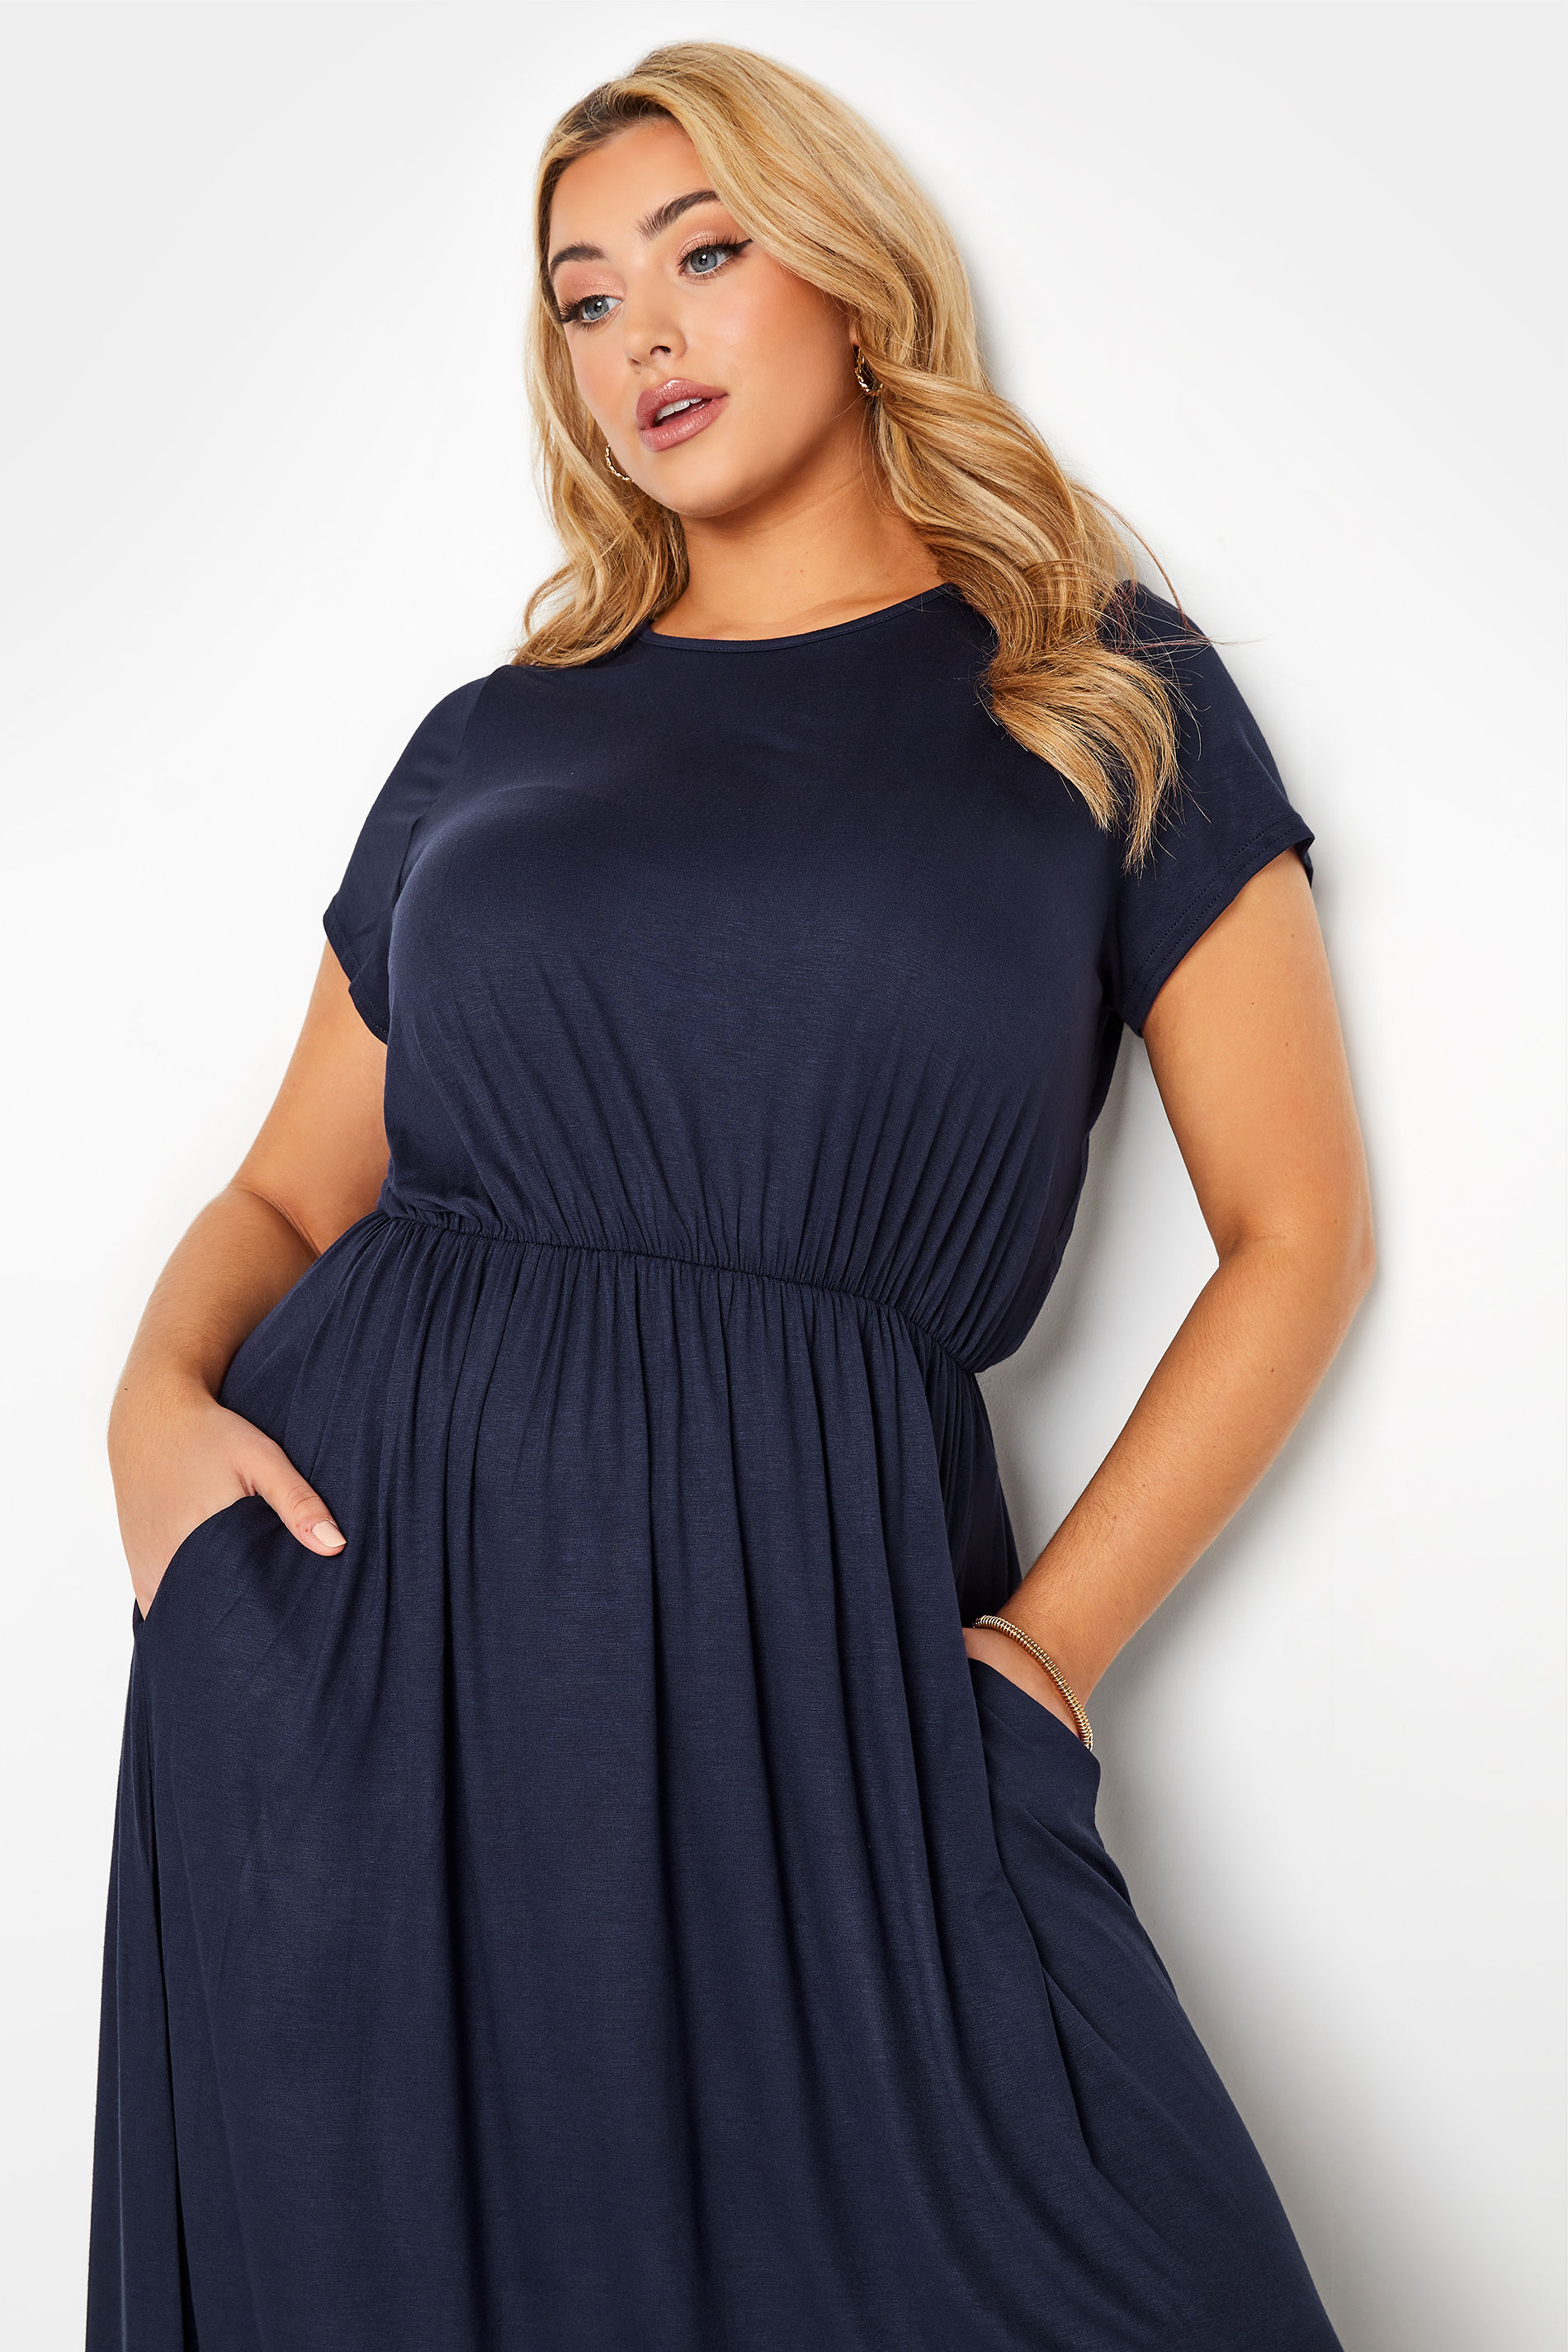 Robes Grande Taille Grande taille  Robes Longues | YOURS LONDON - Robe Bleu Marine Longue à Poches - KG96050